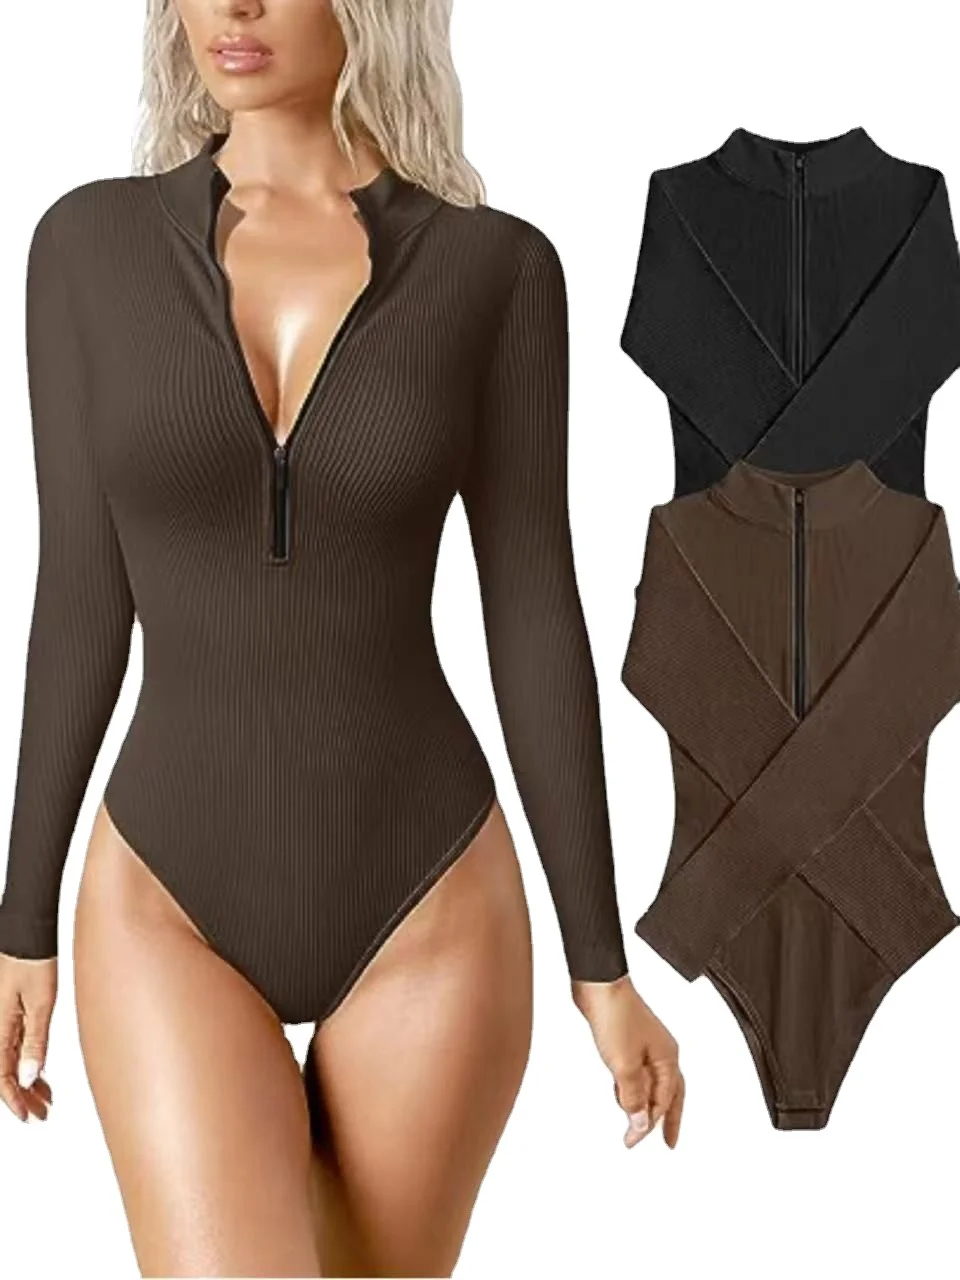 Women's Sport Jumpsuit Ribbed Tight Body Suits Sexy Outfit Fitness Workout Yoga Long Sleeve Bodysuit Zipper One Piece Bodysuit jumpsuit solid color skinny playsuit women long sleeve sheer patchwork waist tight belt overall for party